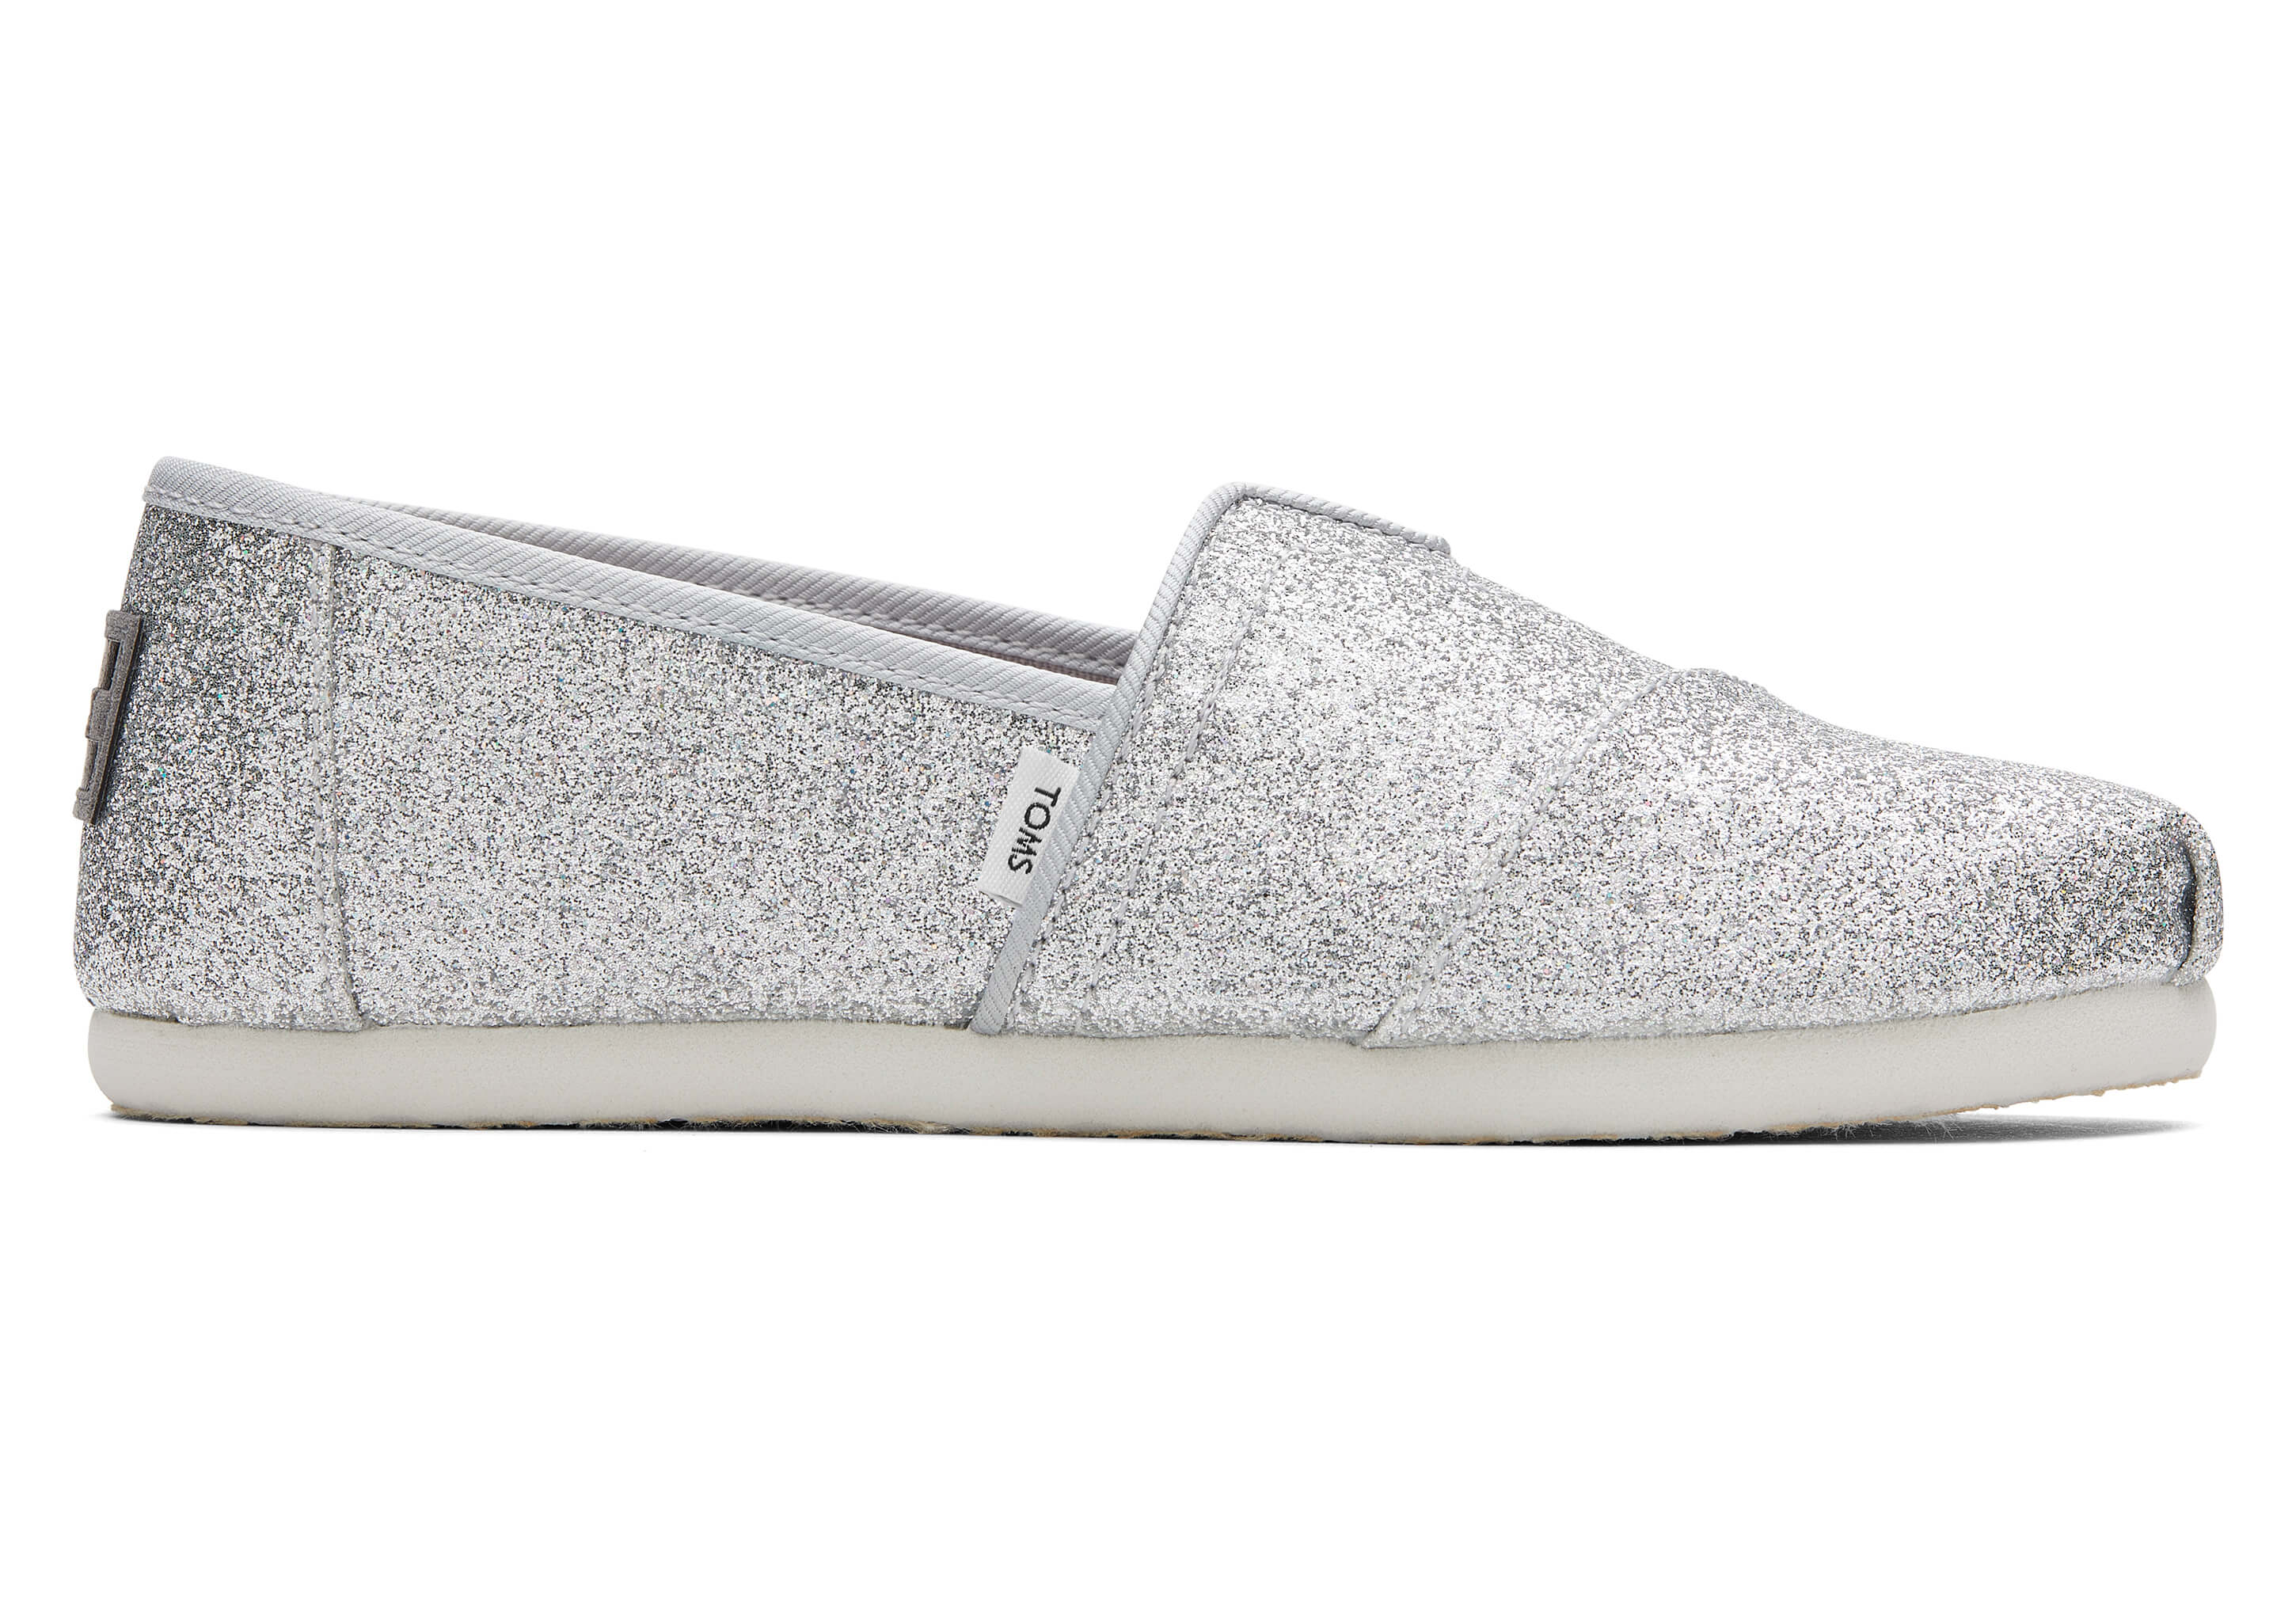 toms silver sneakers